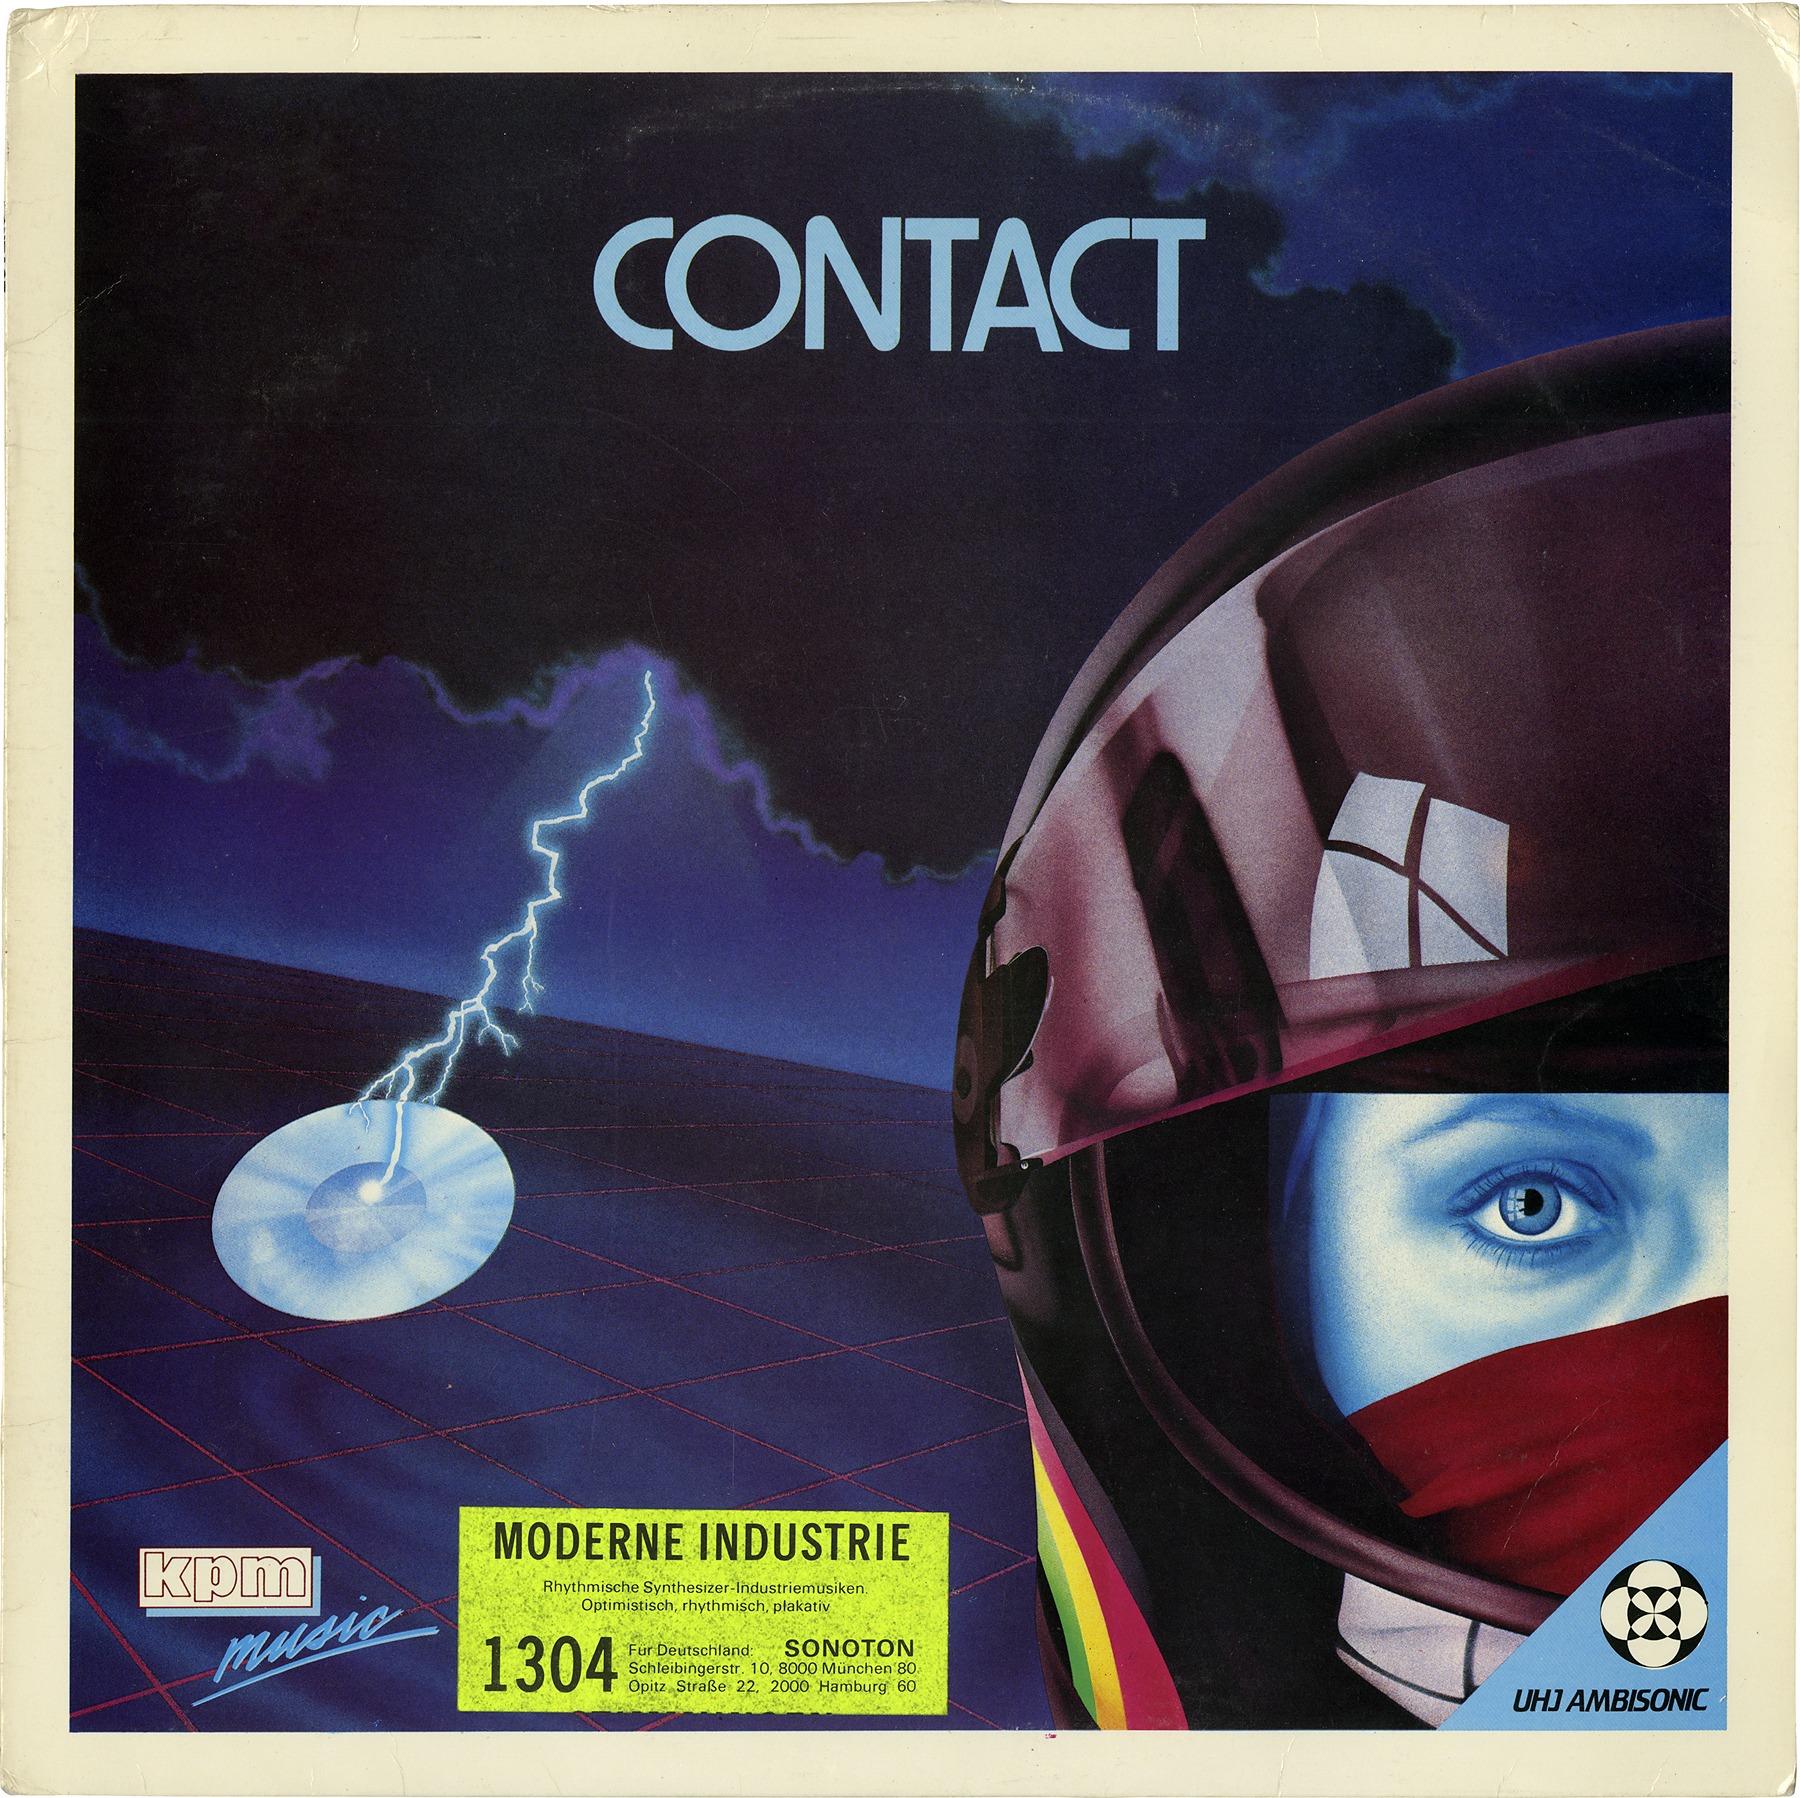 “Contact,” a 1983 record by Keith Mansfield & Richard Elen for the British library KPM.